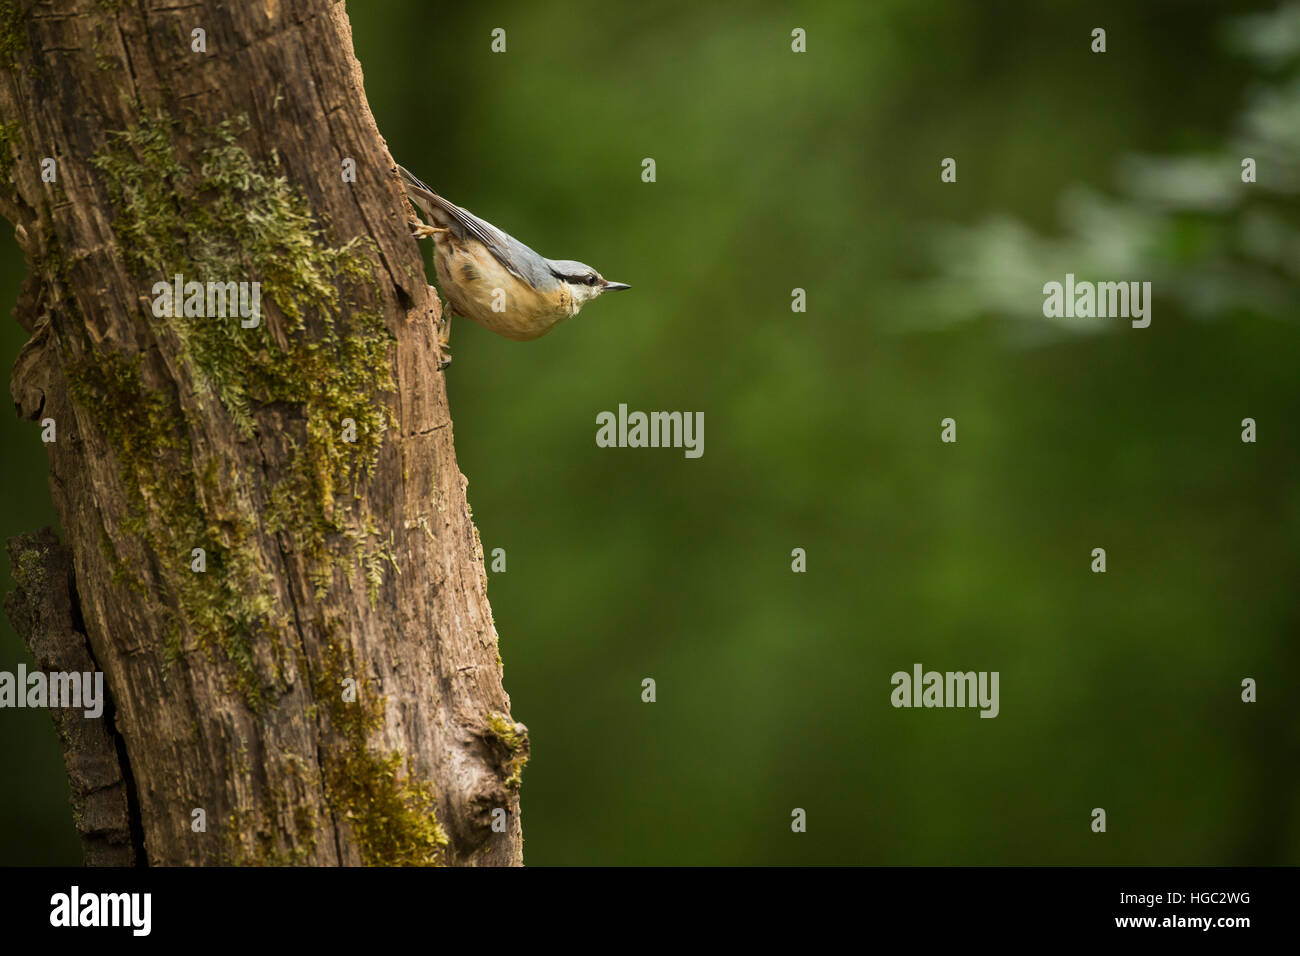 Nuthatch (Sitta europaea) clinging to a tree Stock Photo